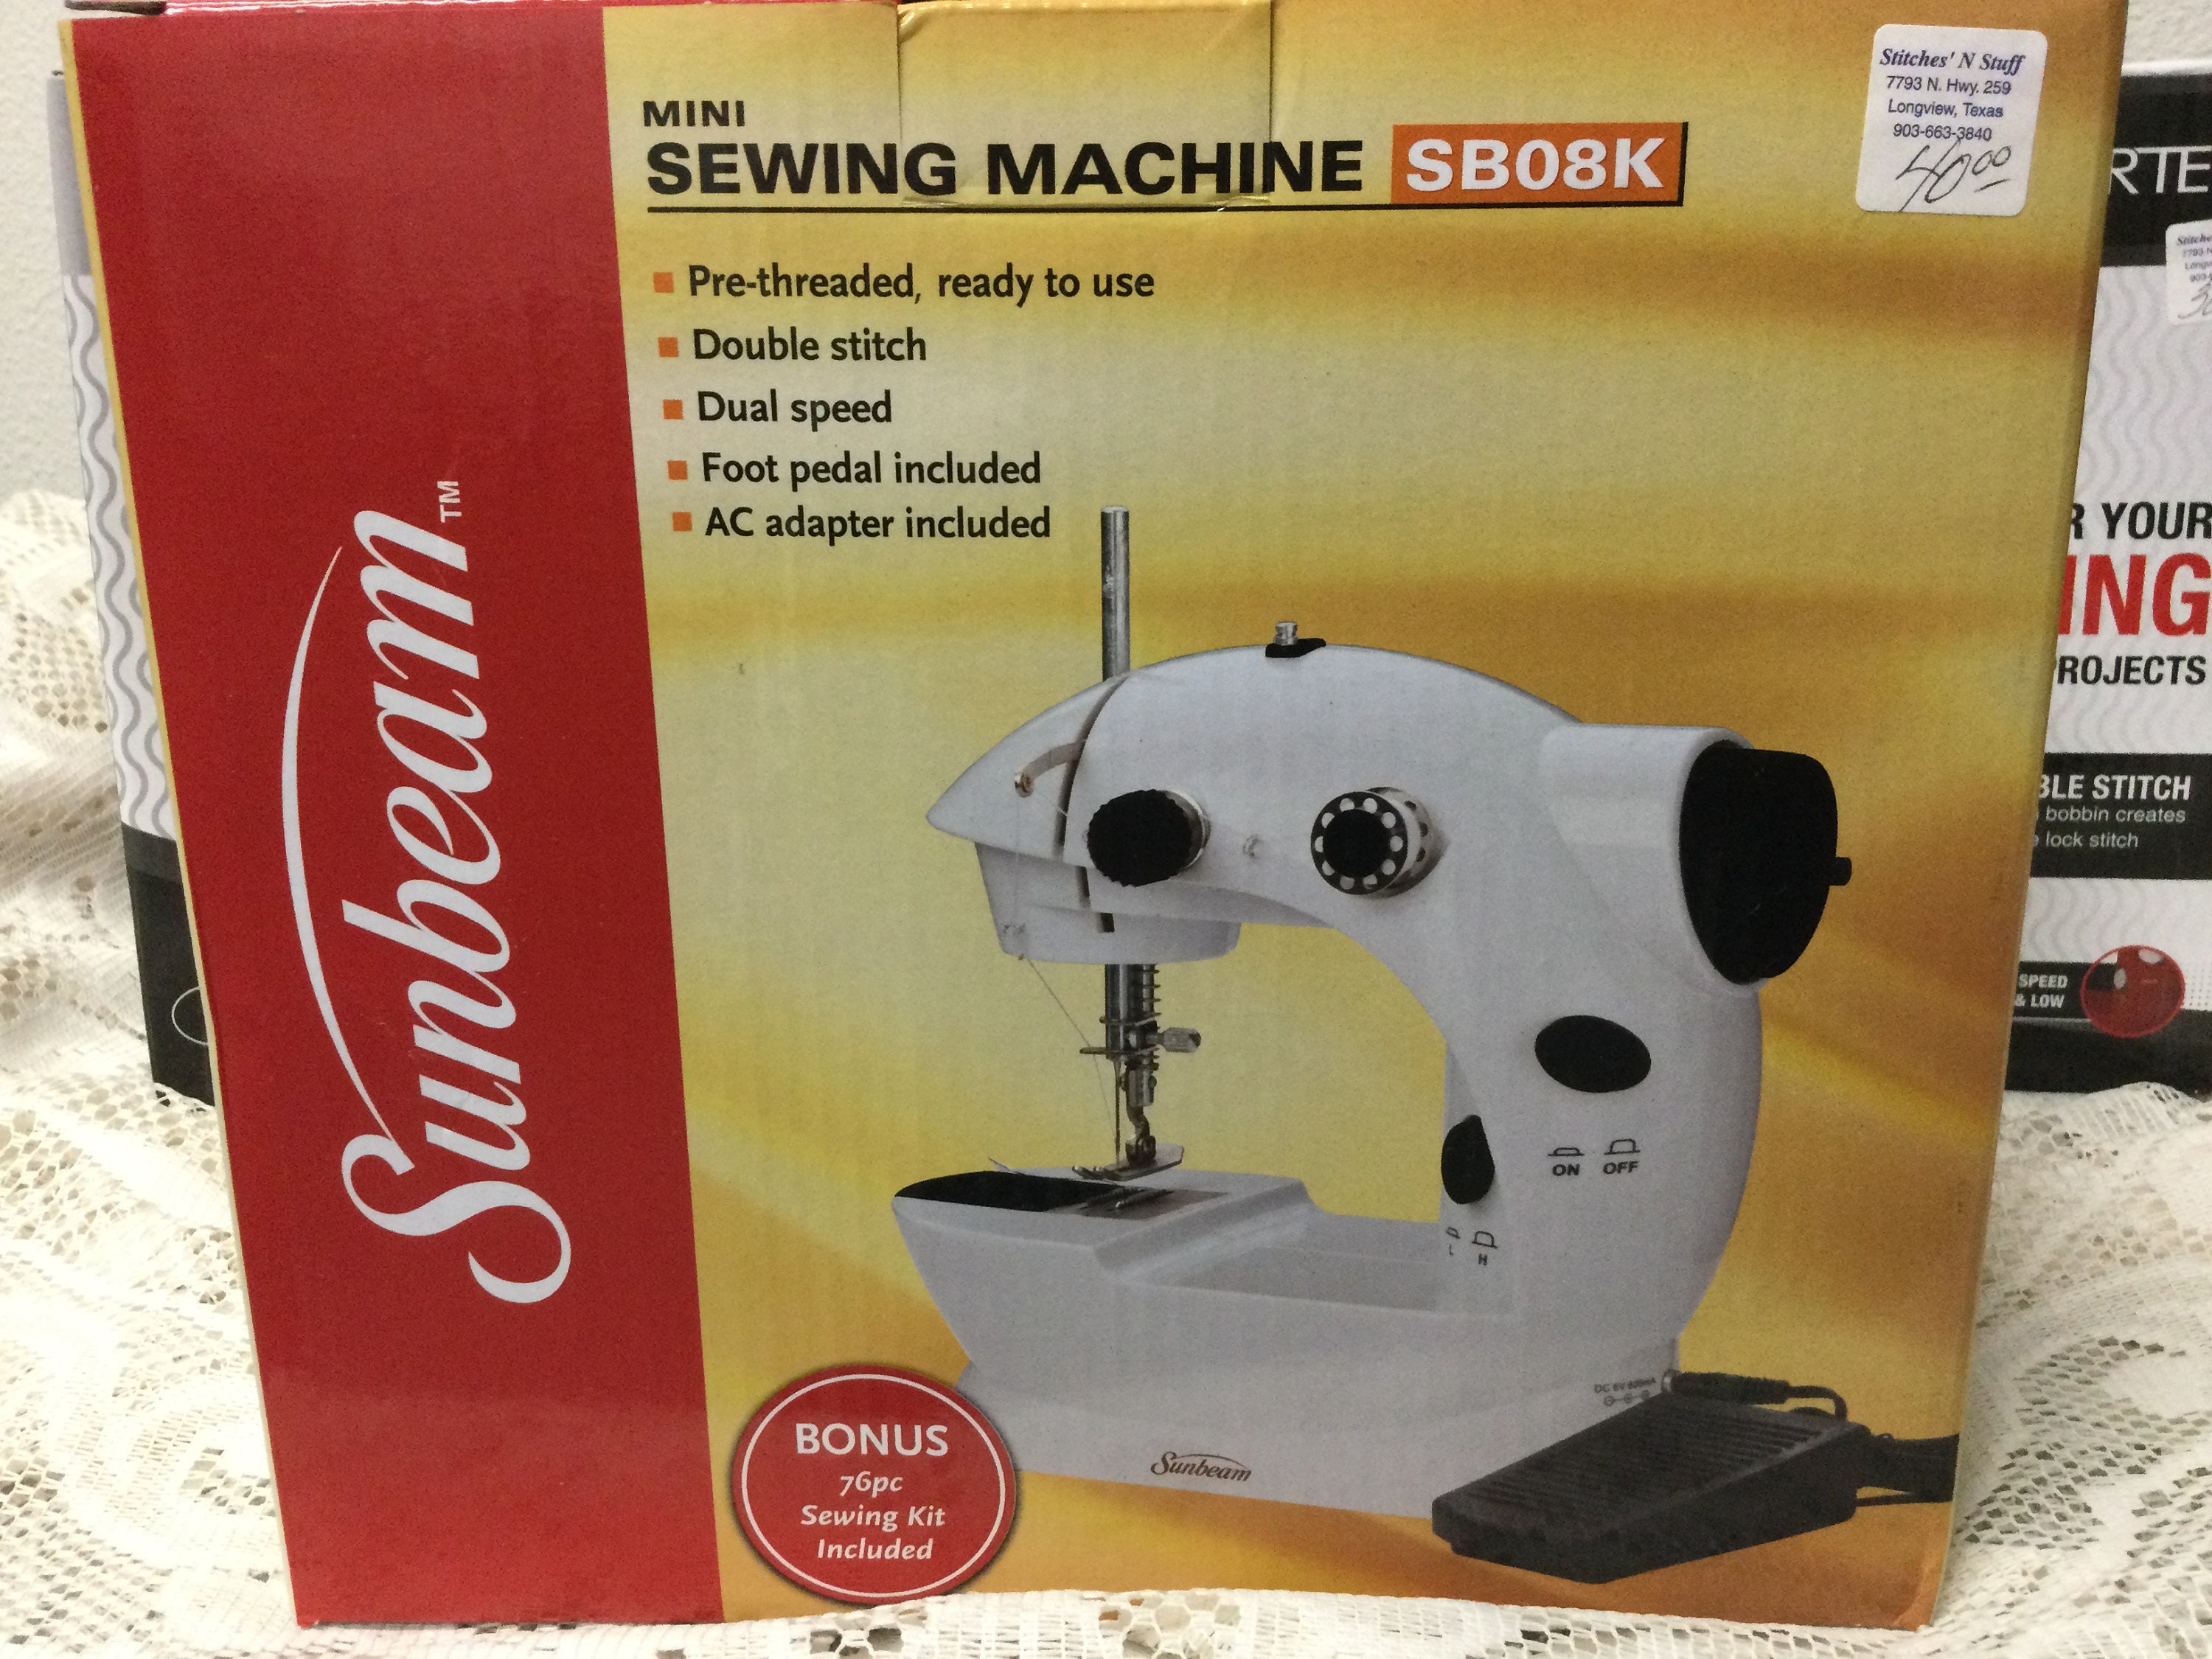 Sunbeam Compact Sewing Machine with Sewing Kit